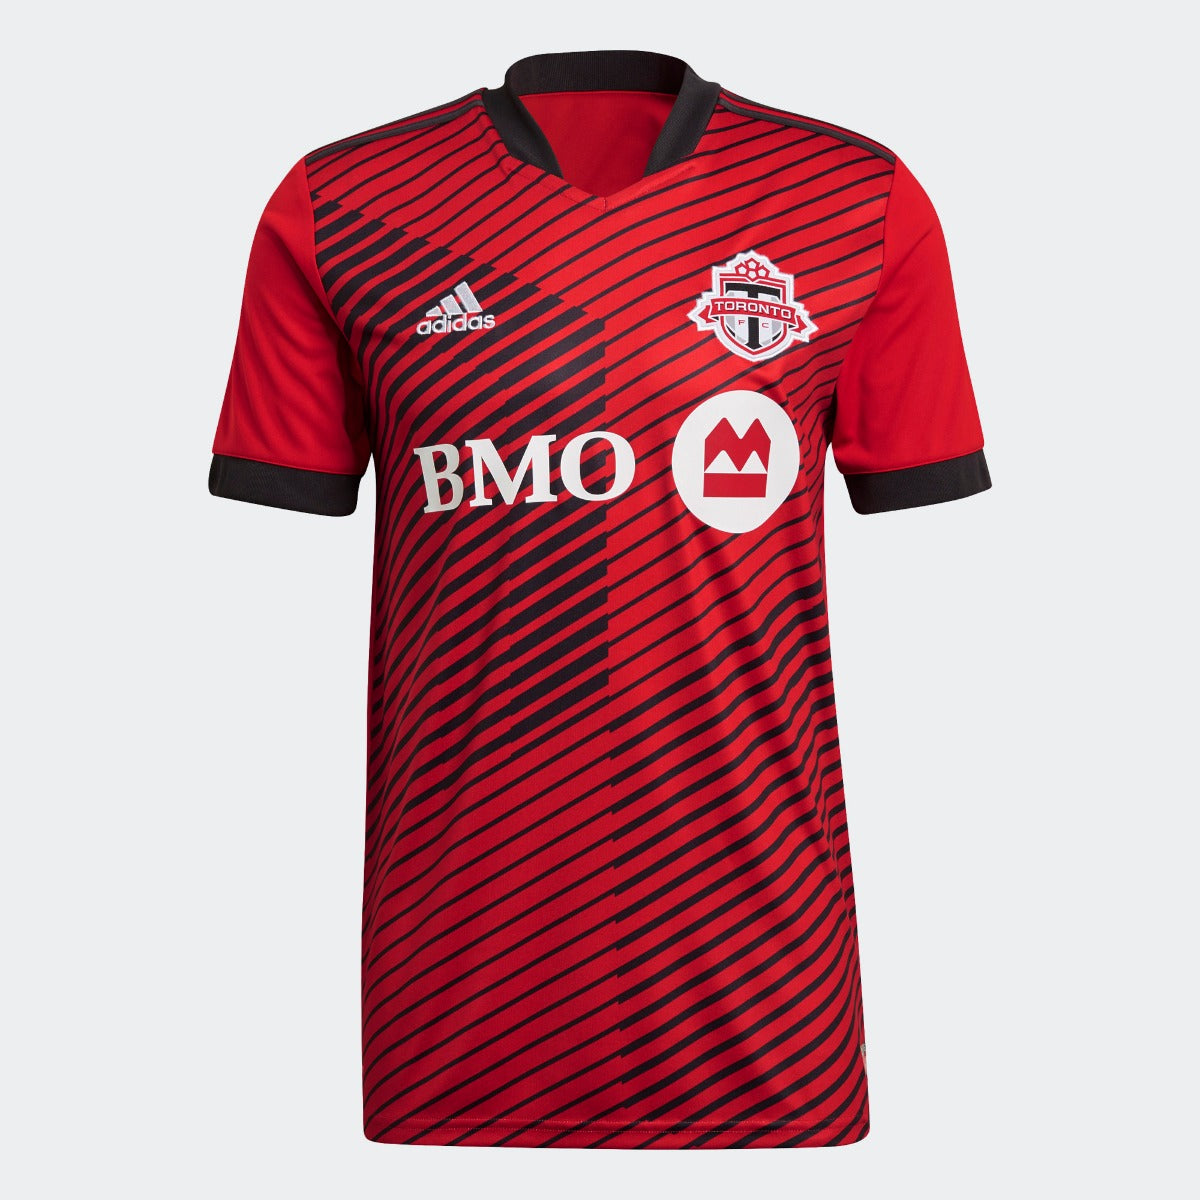 Adidas 2021-22 Toronto FC Home Jersey - Red-Black (Front)